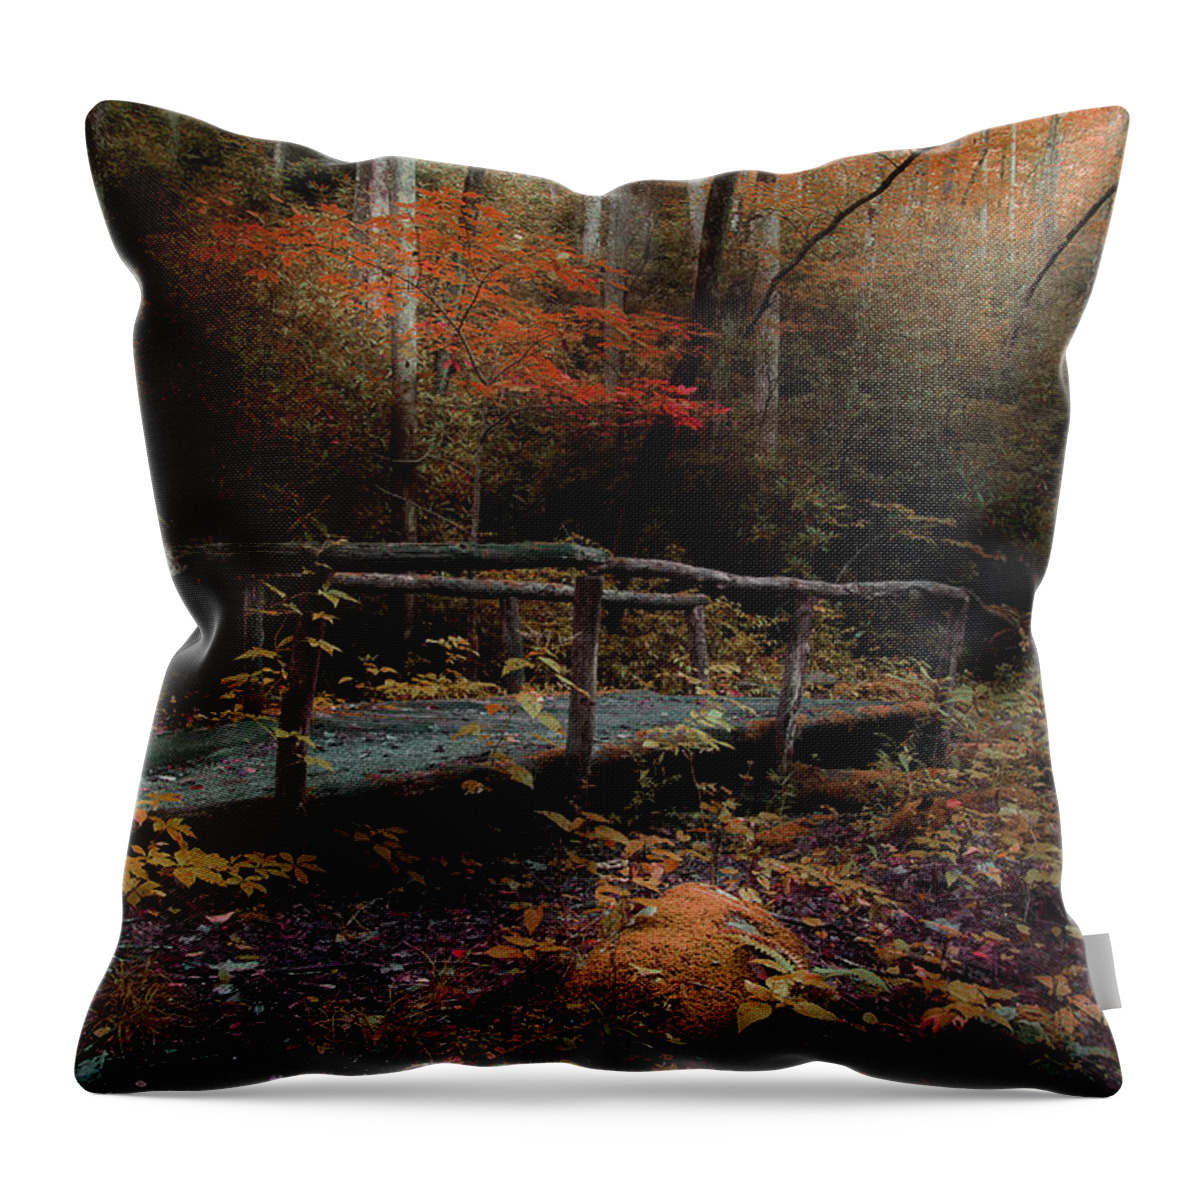 Nature Trail Bridge Throw Pillow featuring the photograph A Day Hiking by Mike Eingle